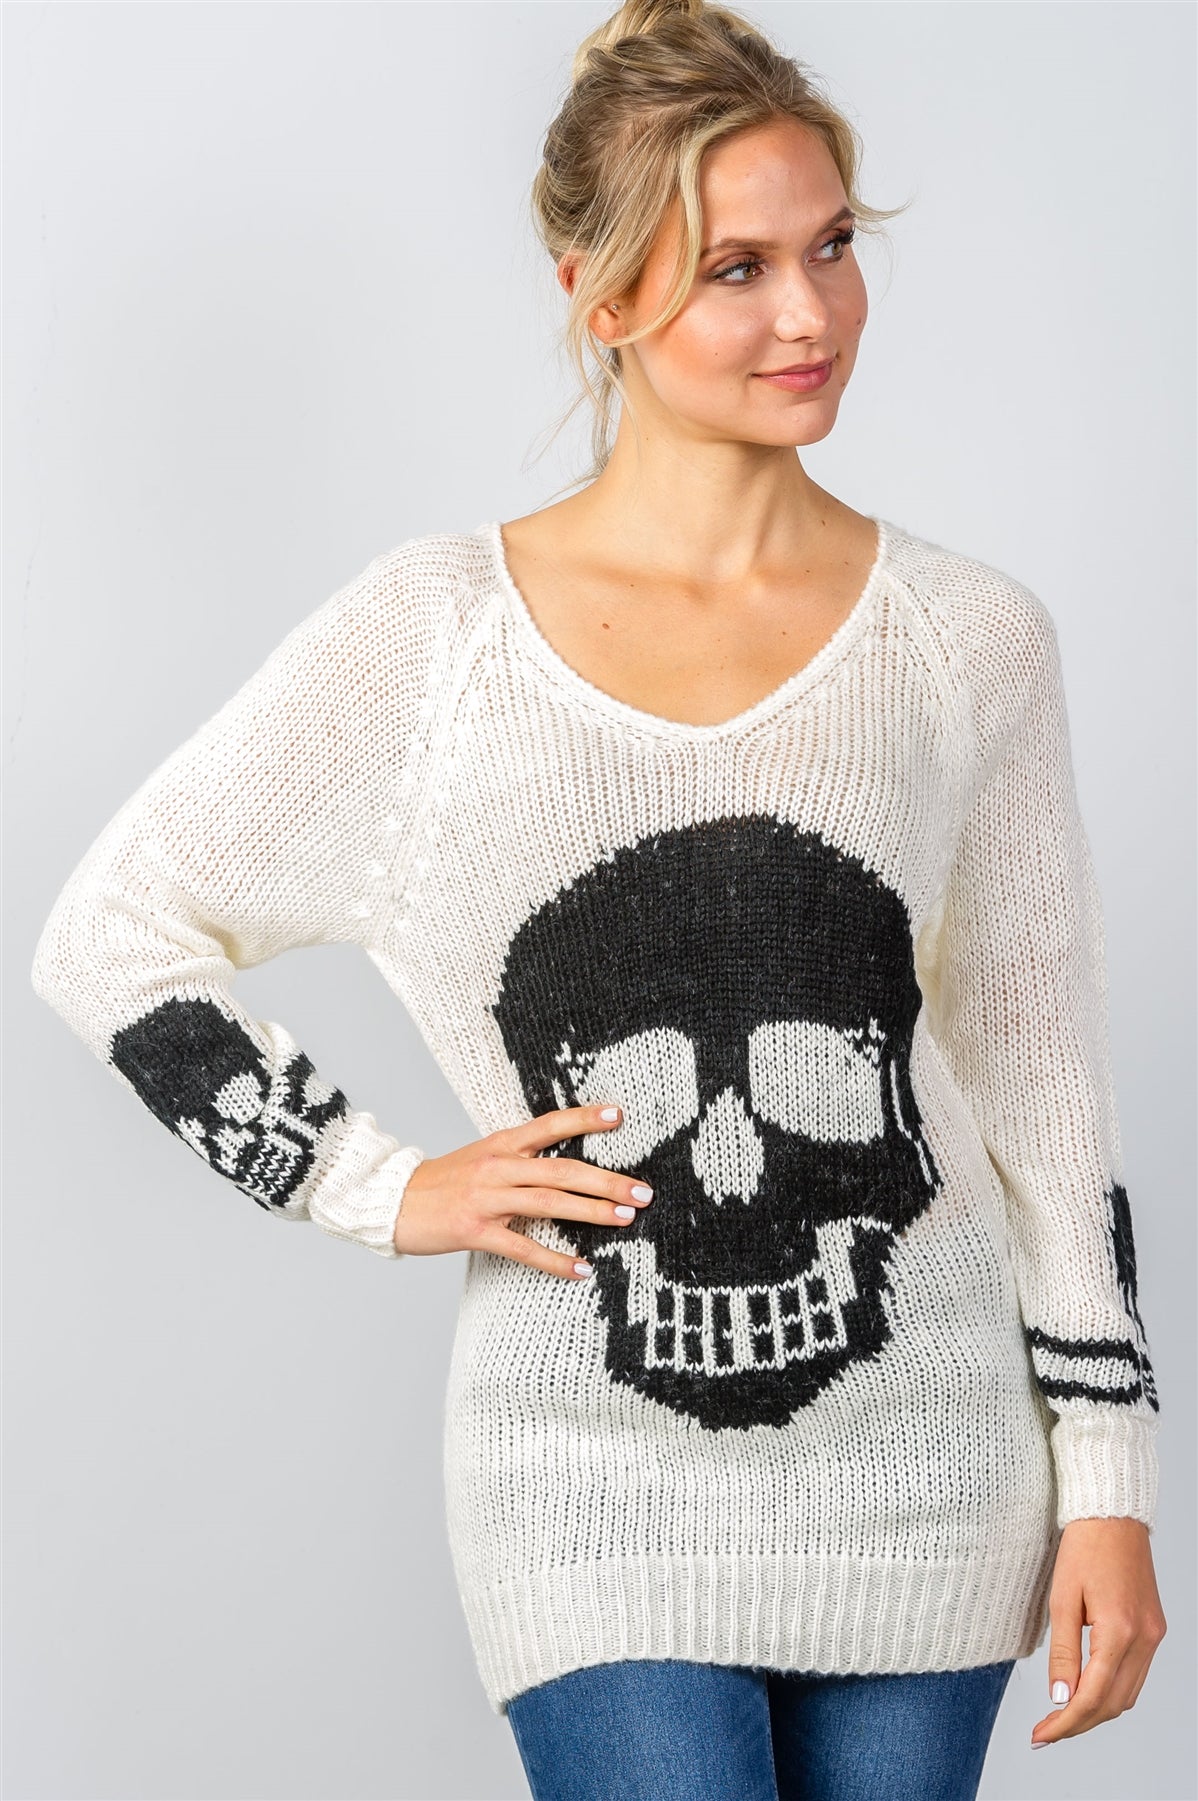 Ladies fashion contrast skull printed pullover sweater